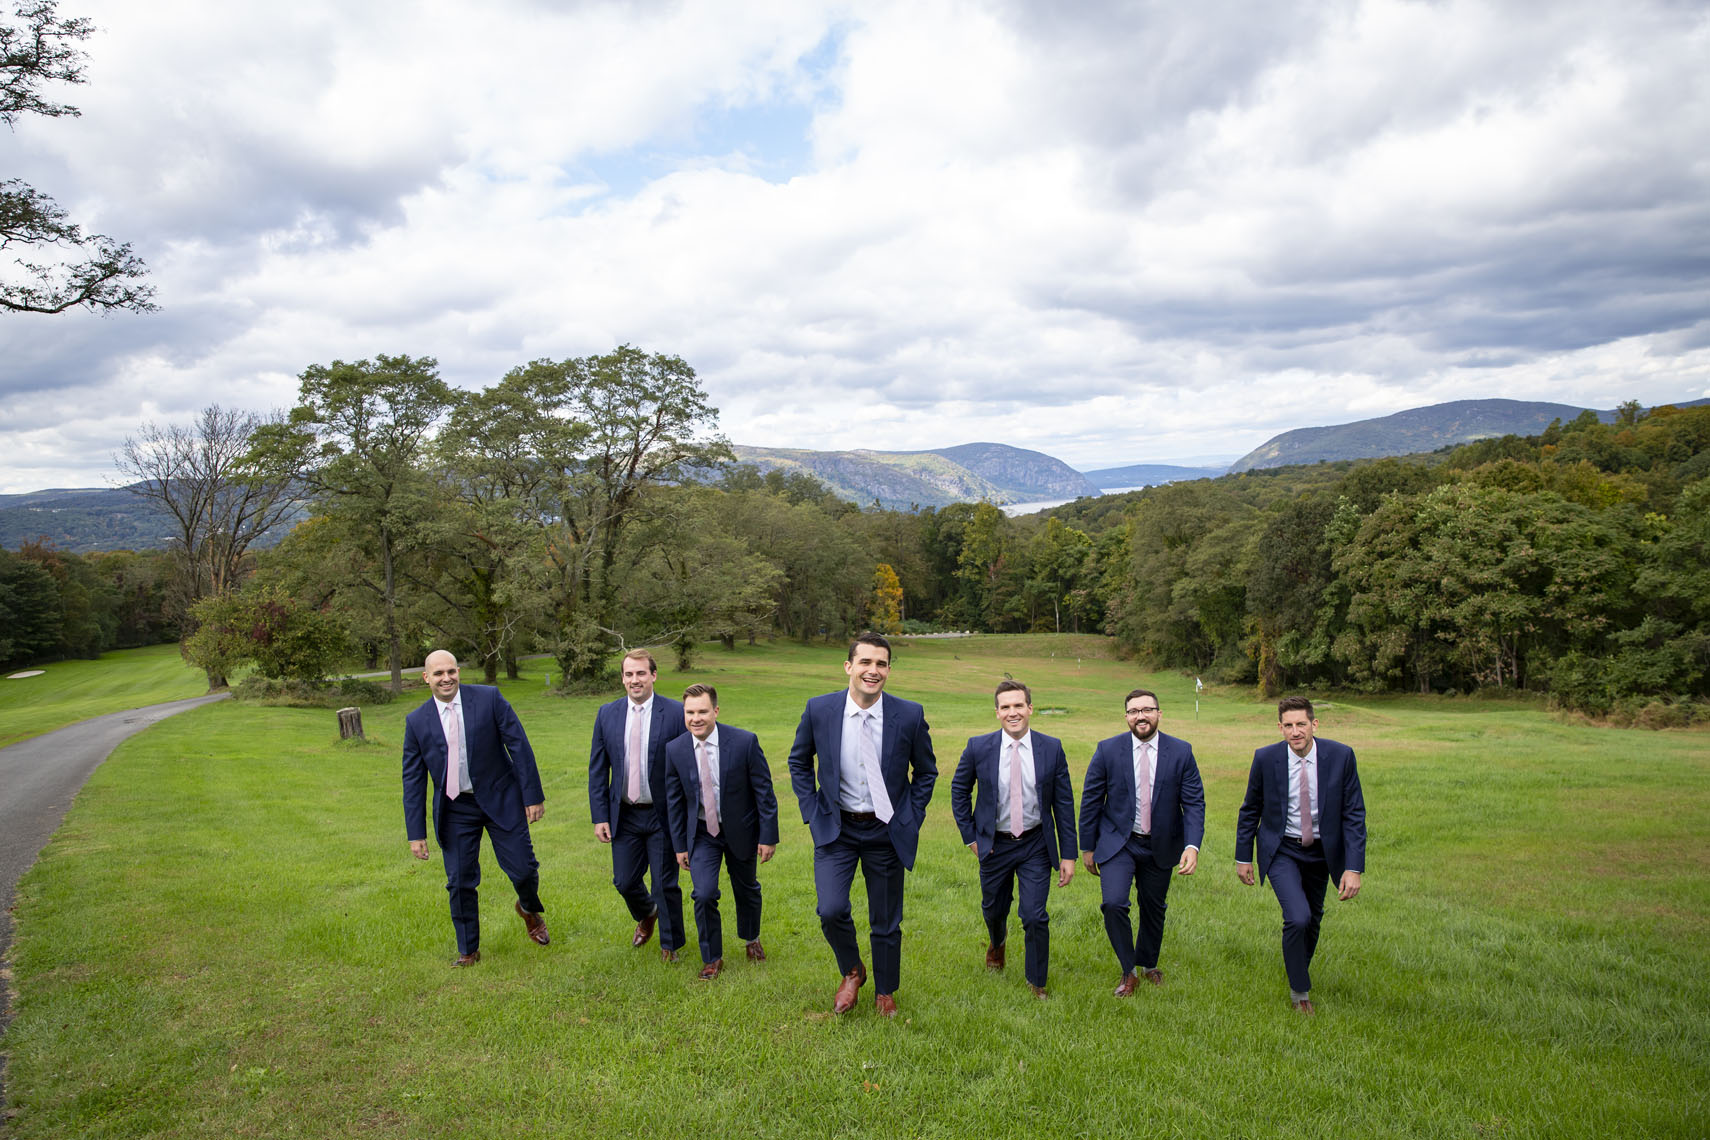 Hudson Valley Fall wedding at The Garrison 